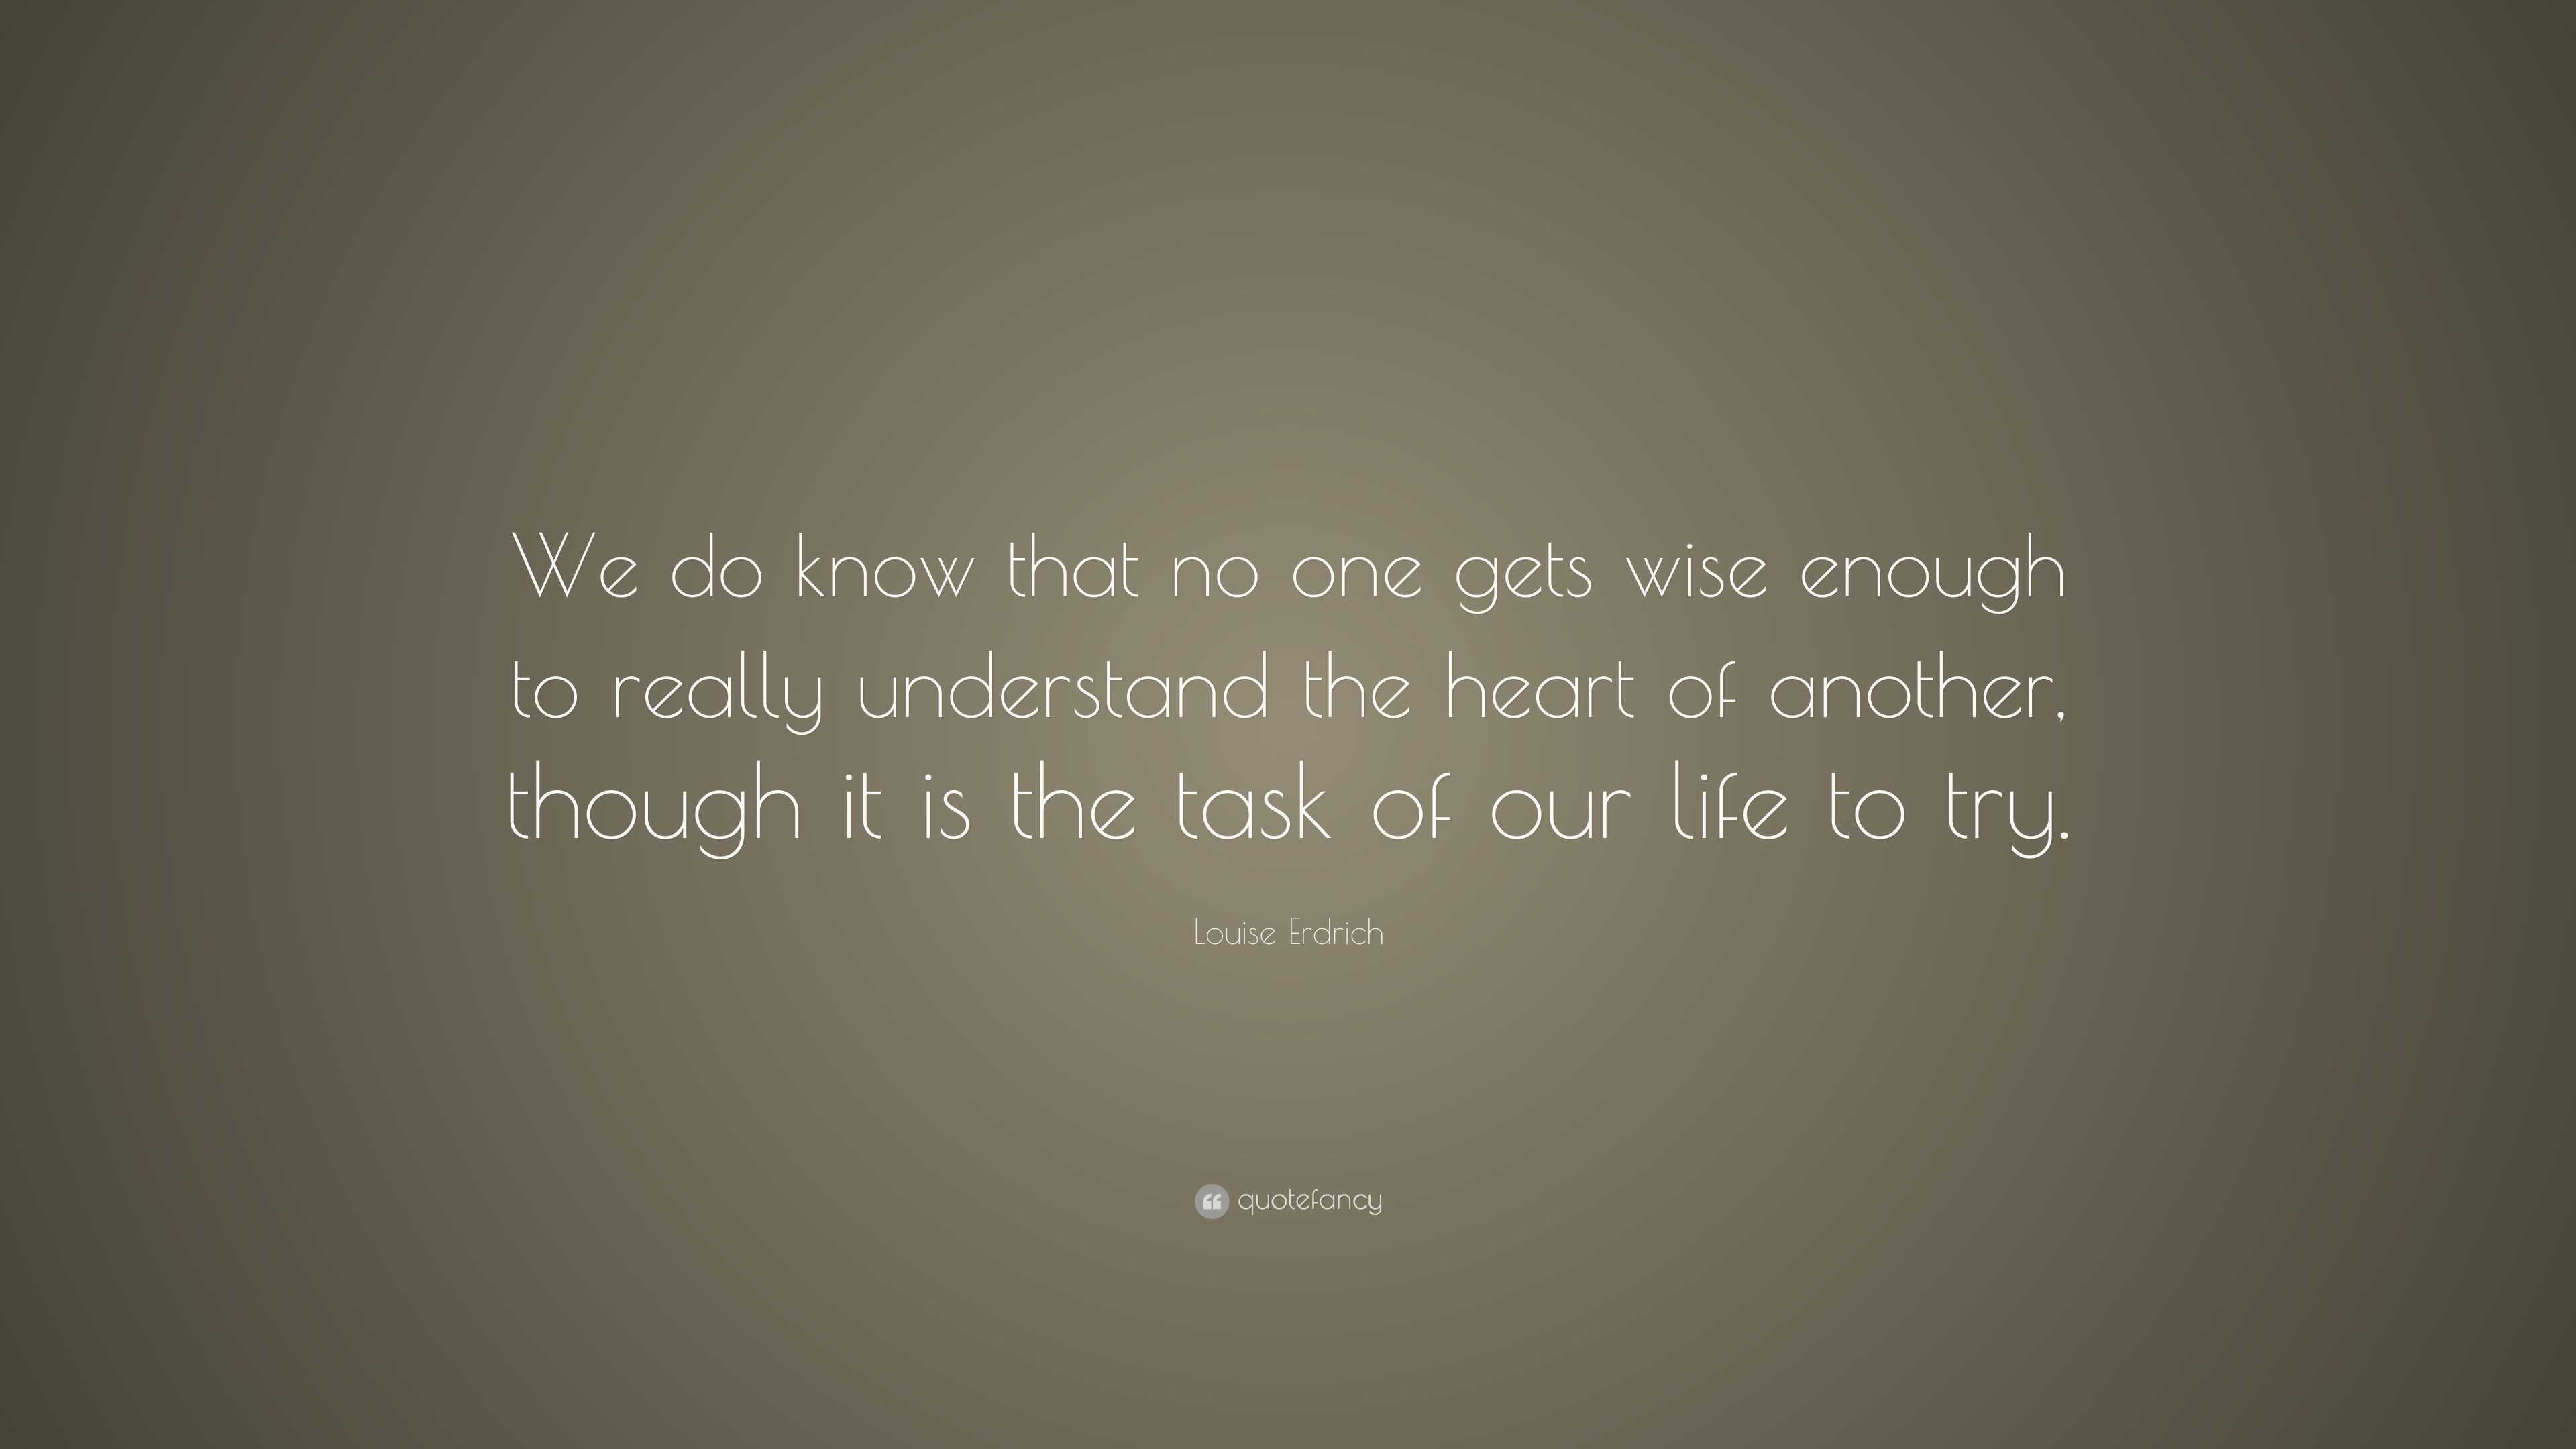 Louise Erdrich Quote: “We do know that no one gets wise enough to ...